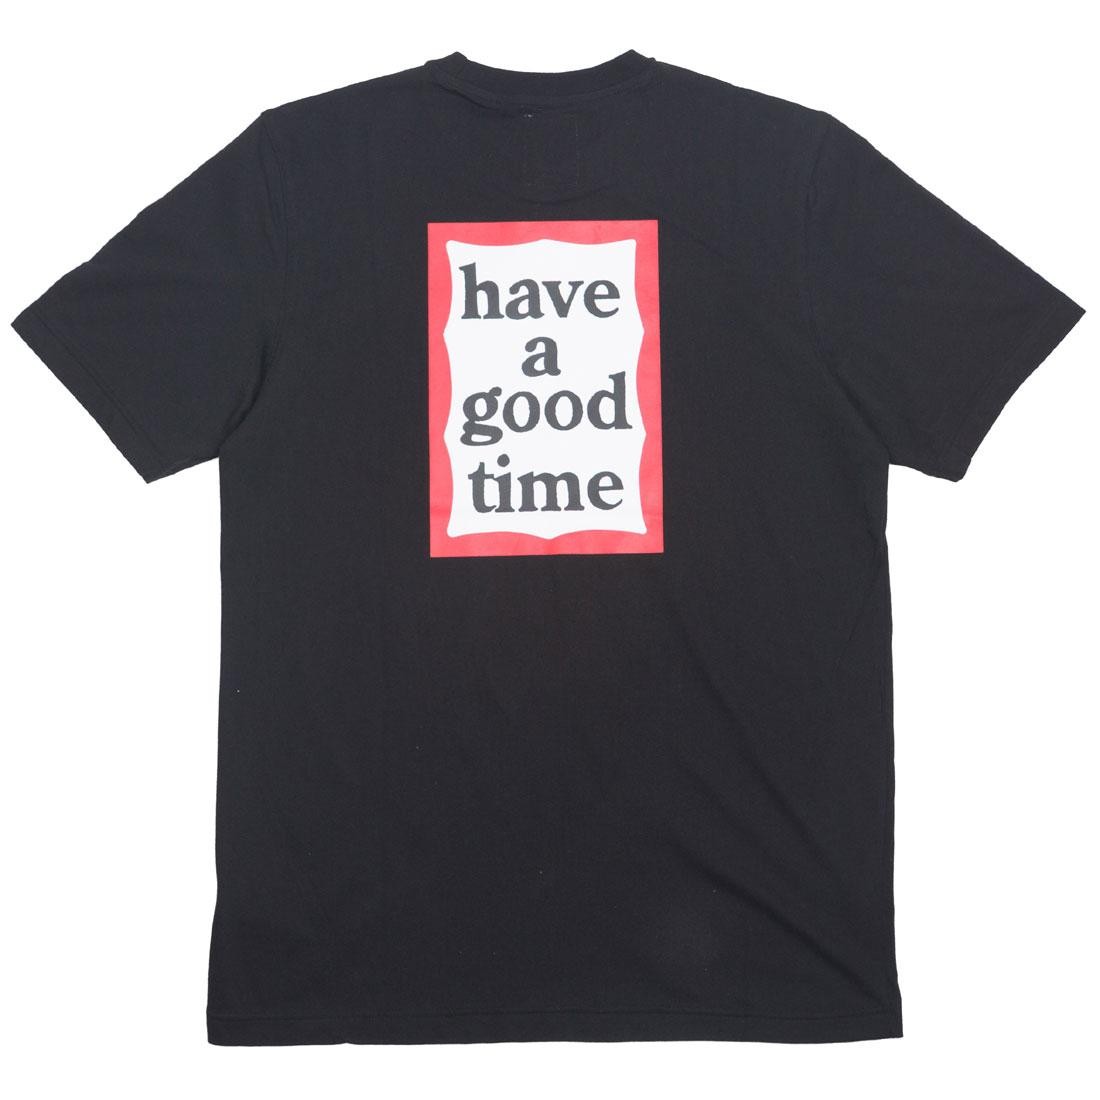 adidas have a good time tee